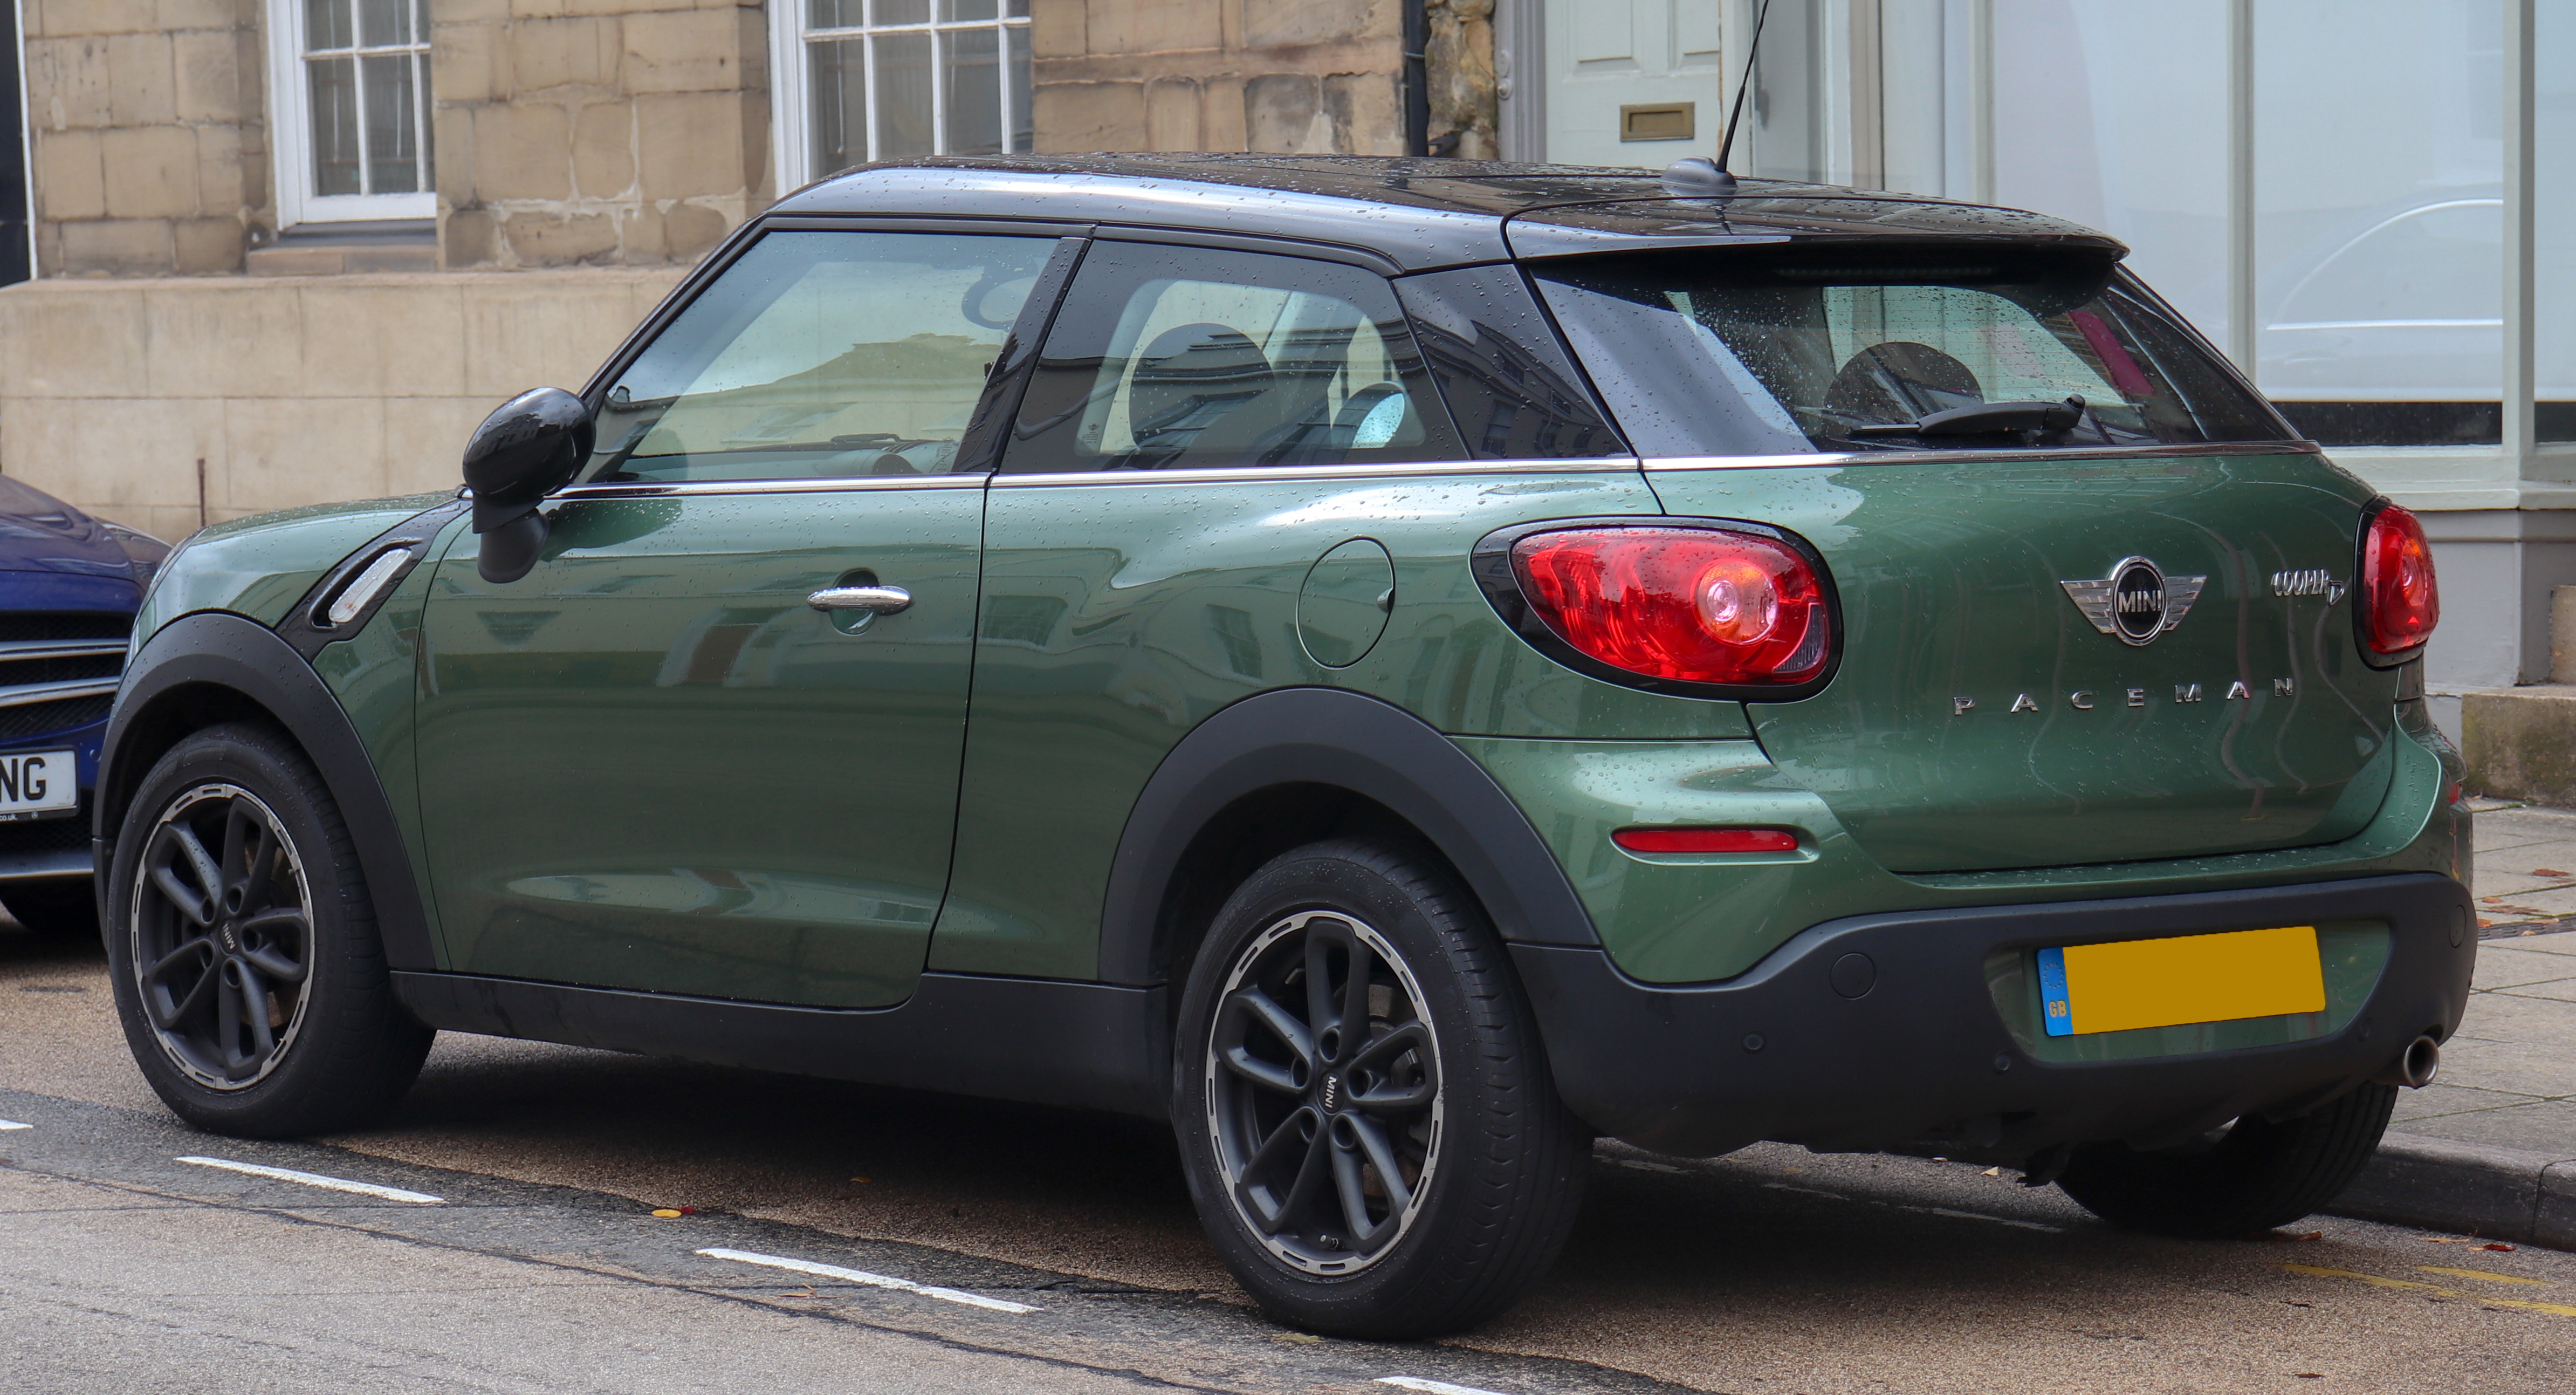 File:2015 Mini Paceman Cooper D Automatic 2.0 Rear.jpg - Wikimedia Commons